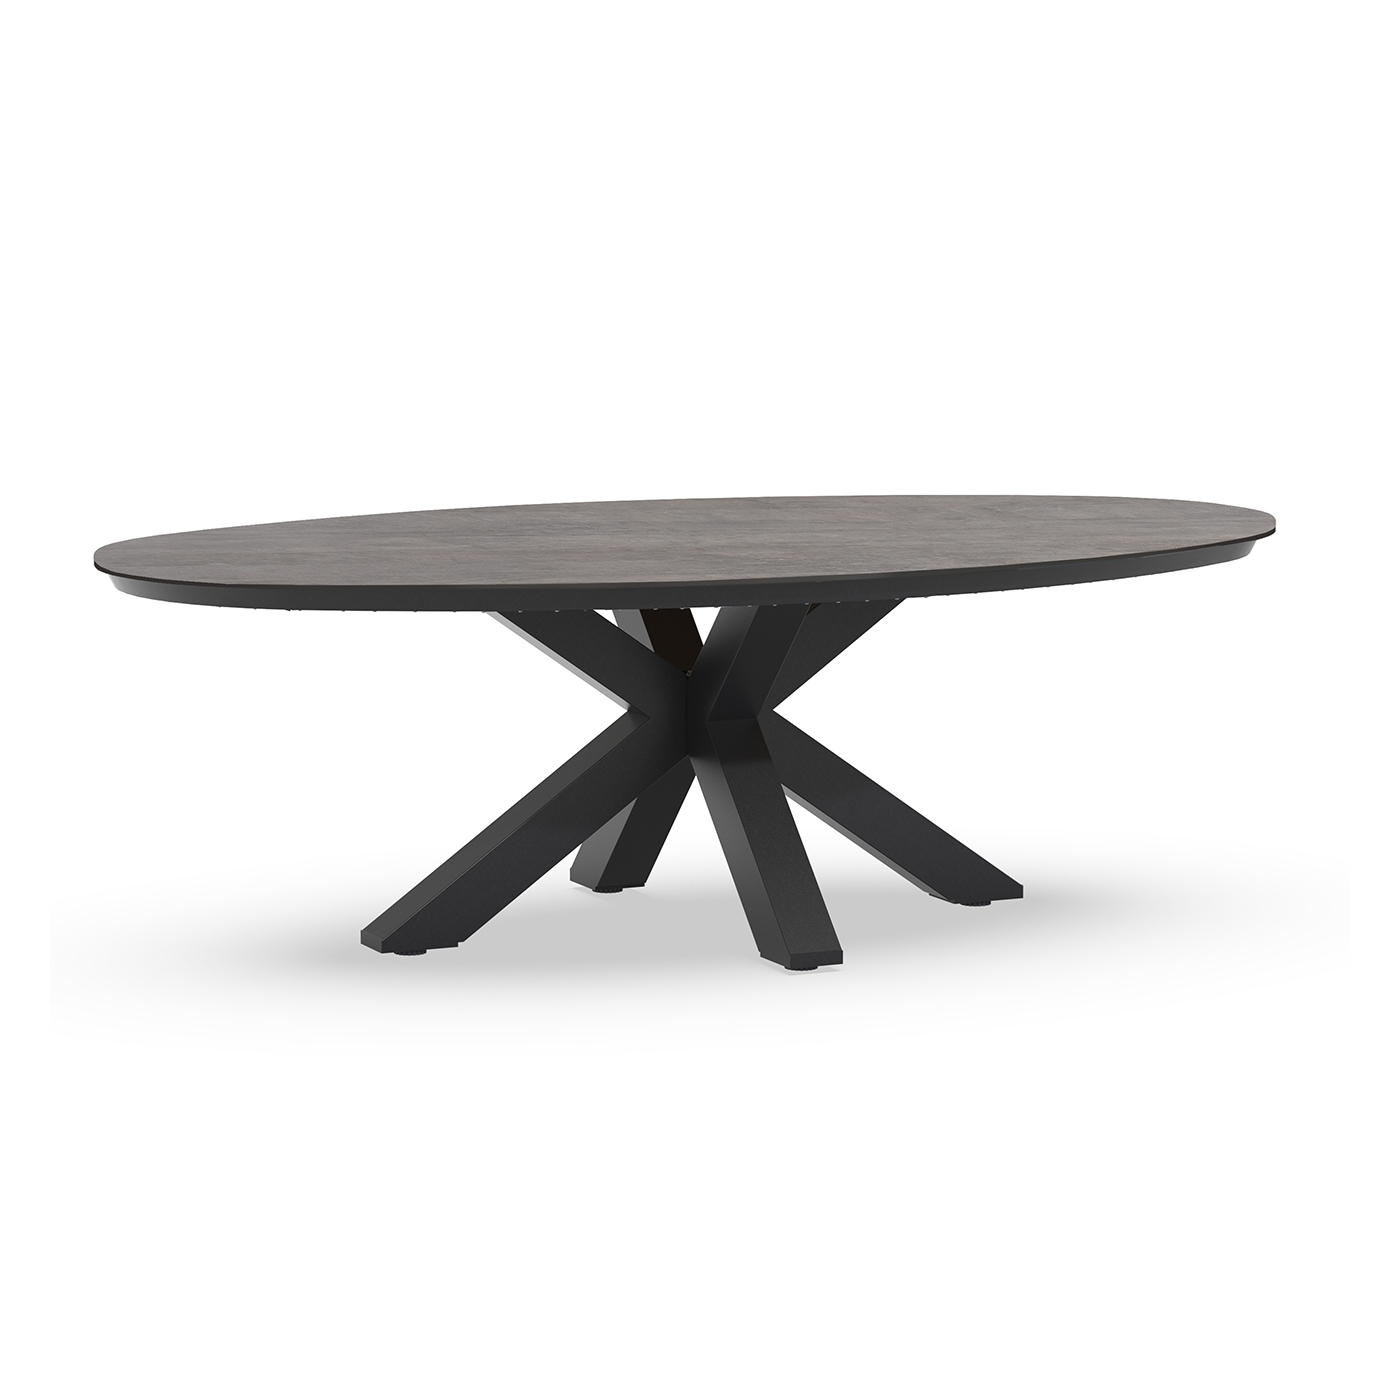 Oblong Low Dining Table Trespa Forest Grey 220 x 130 cm Charcoal